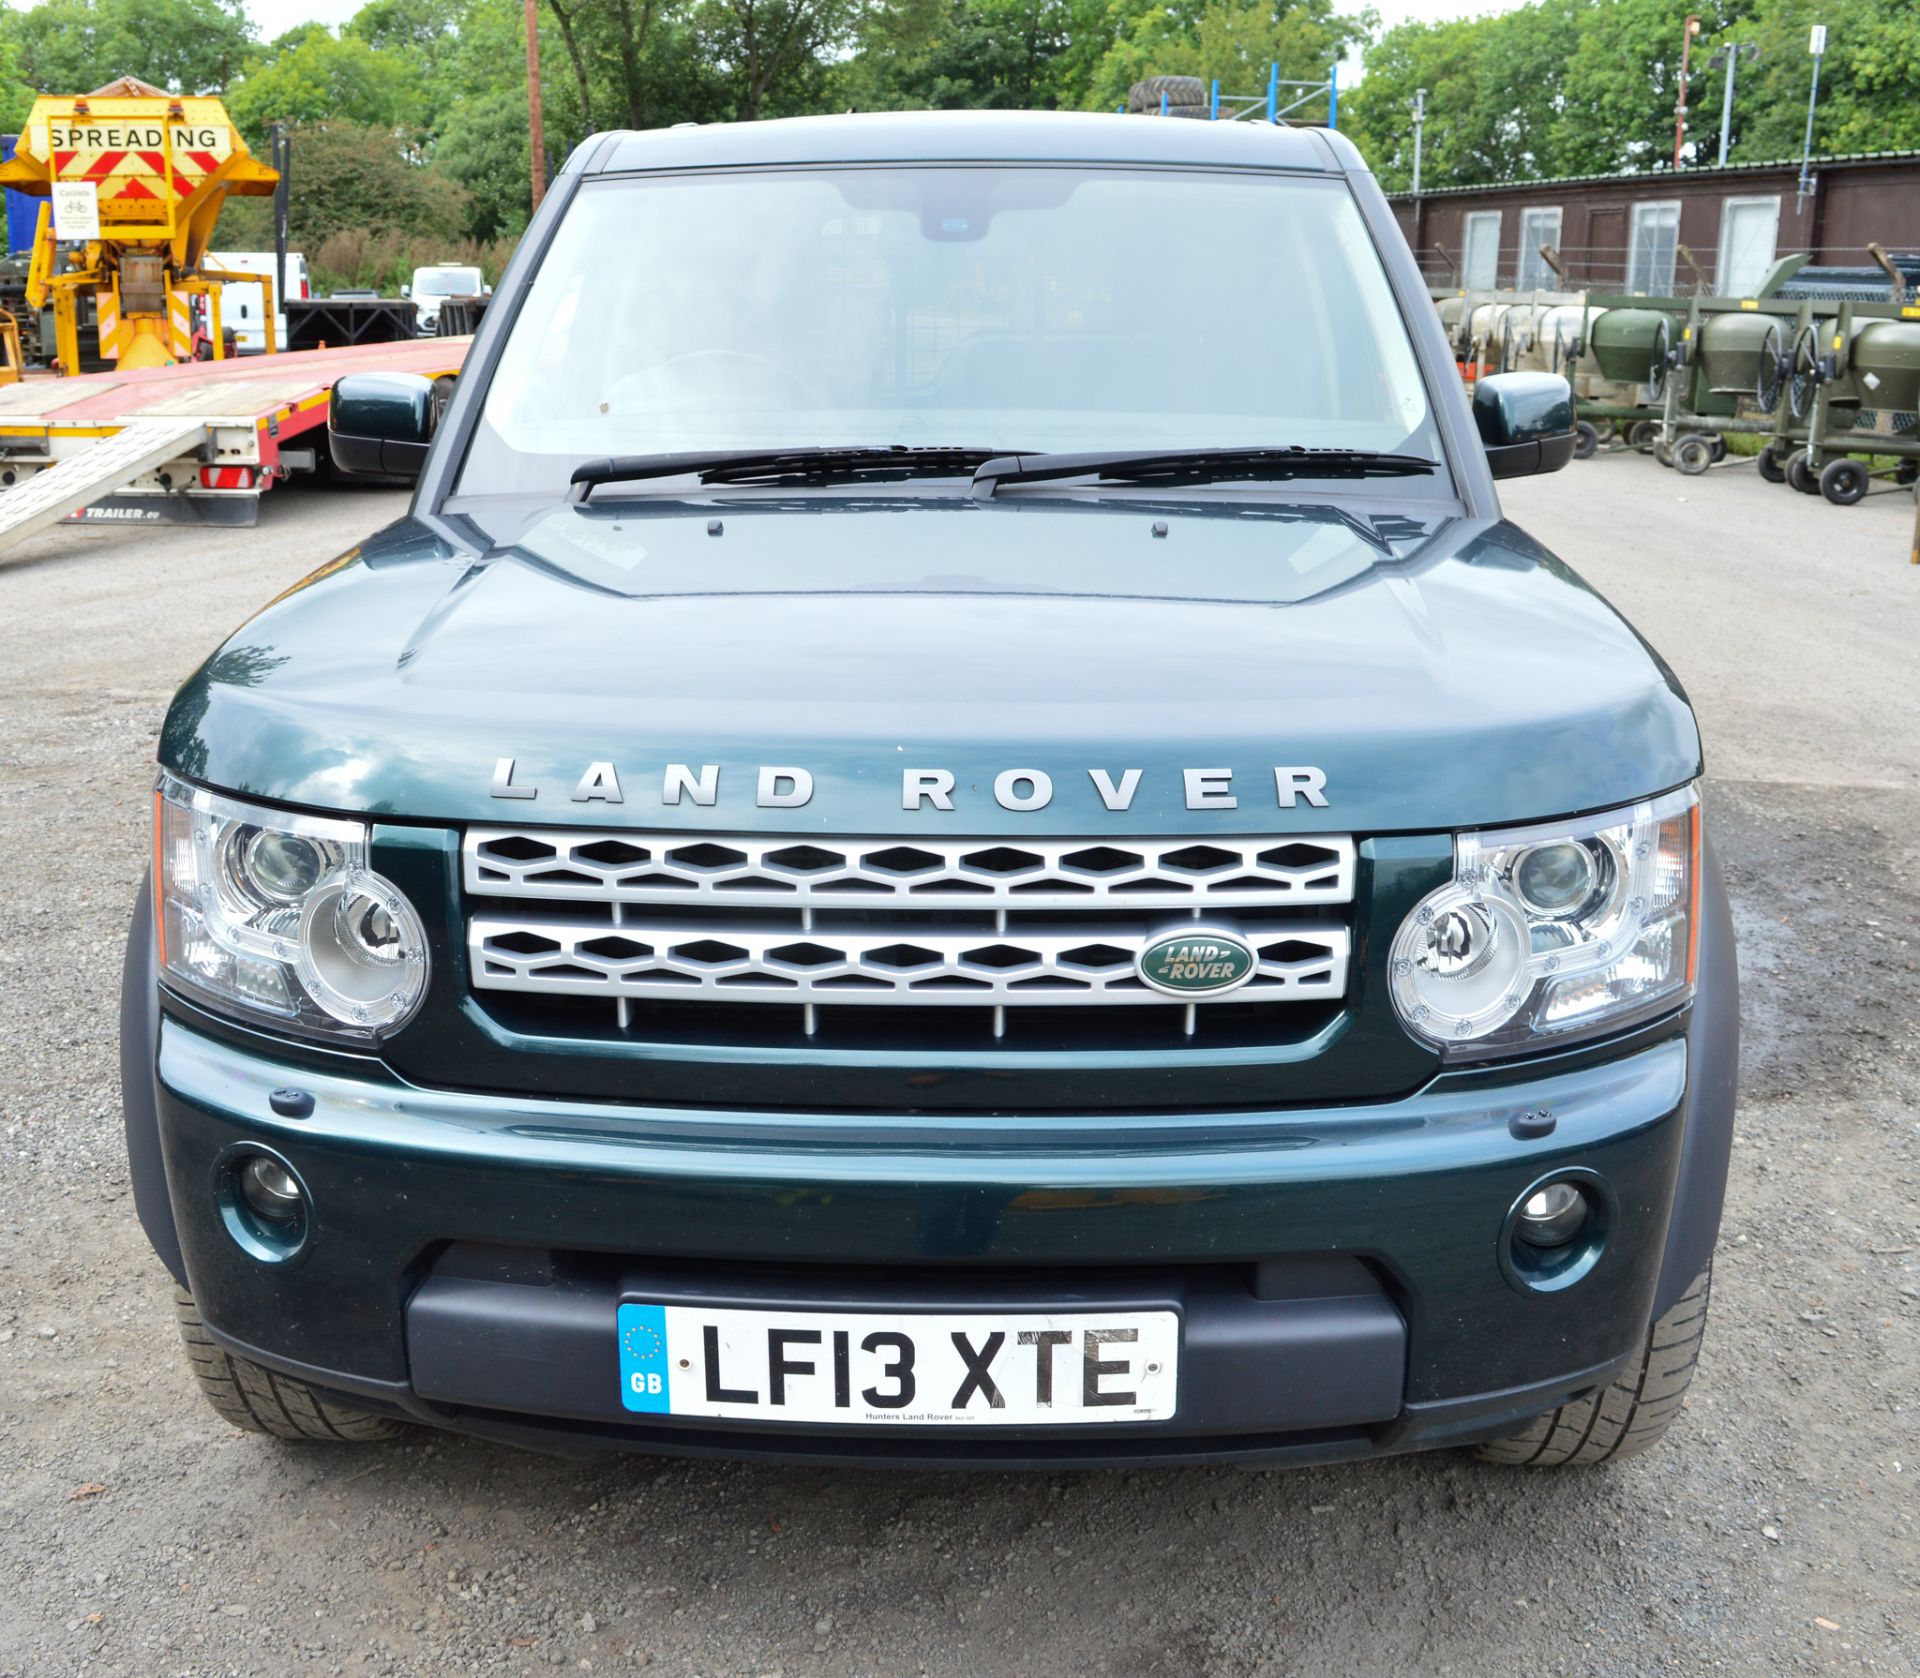 Land Rover Discovery 4 SDV6 Auto 4x4 Commercial utility vehicle Registration Number: LF13 XTE Date - Image 5 of 10